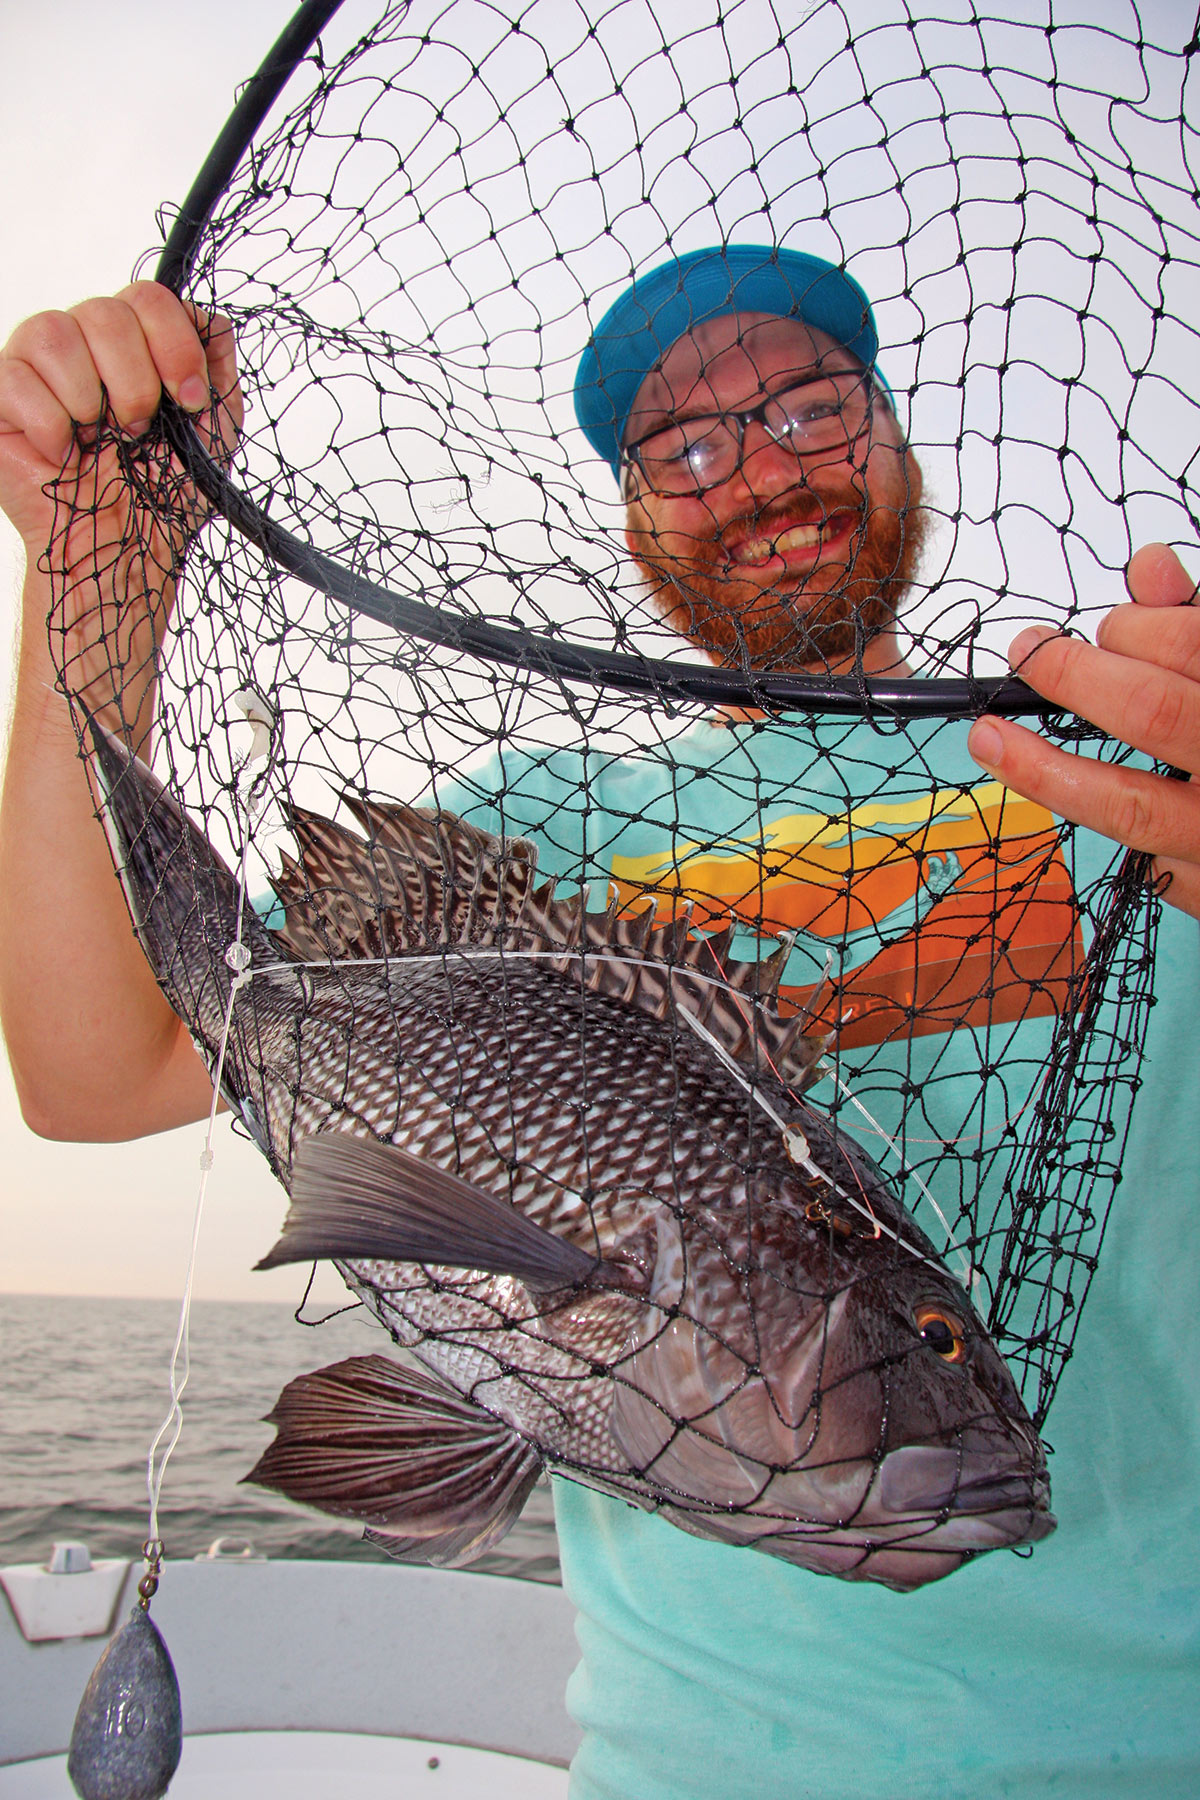 Man smiling with black sea bass inside fish net